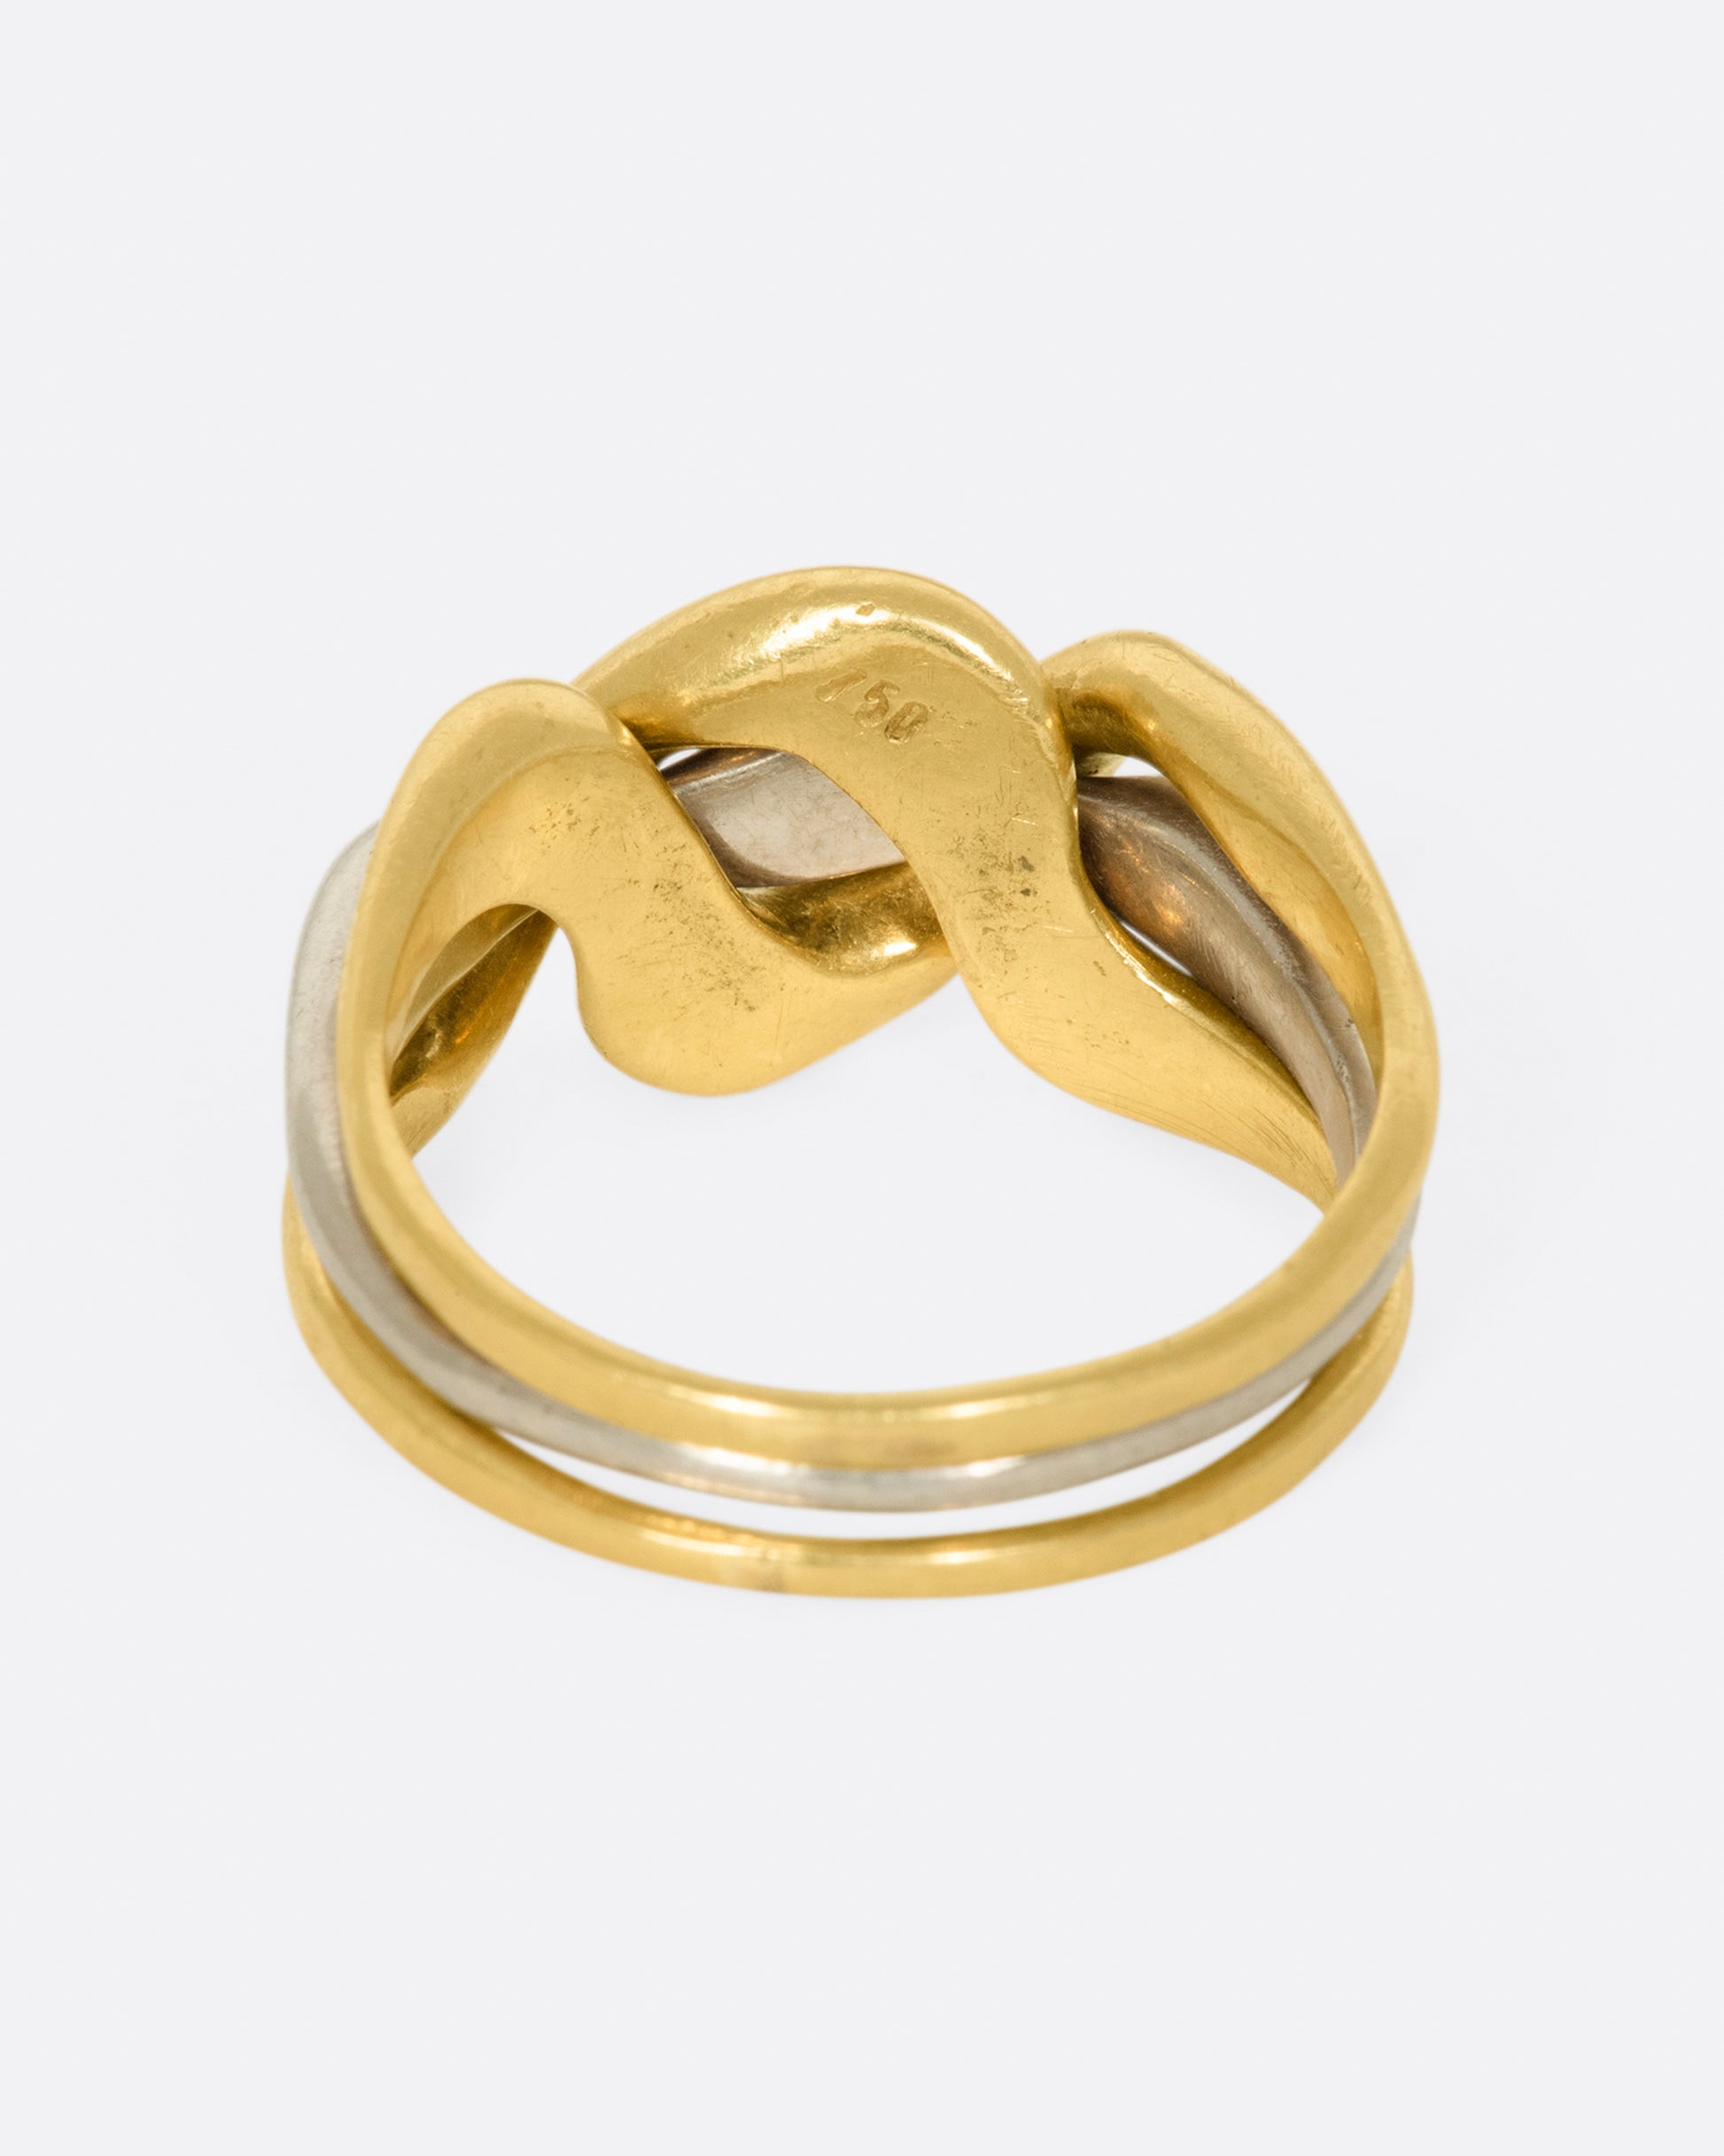 A puffy, yellow and white gold puzzle ring that, no matter how you shake it, will never come unlinked.